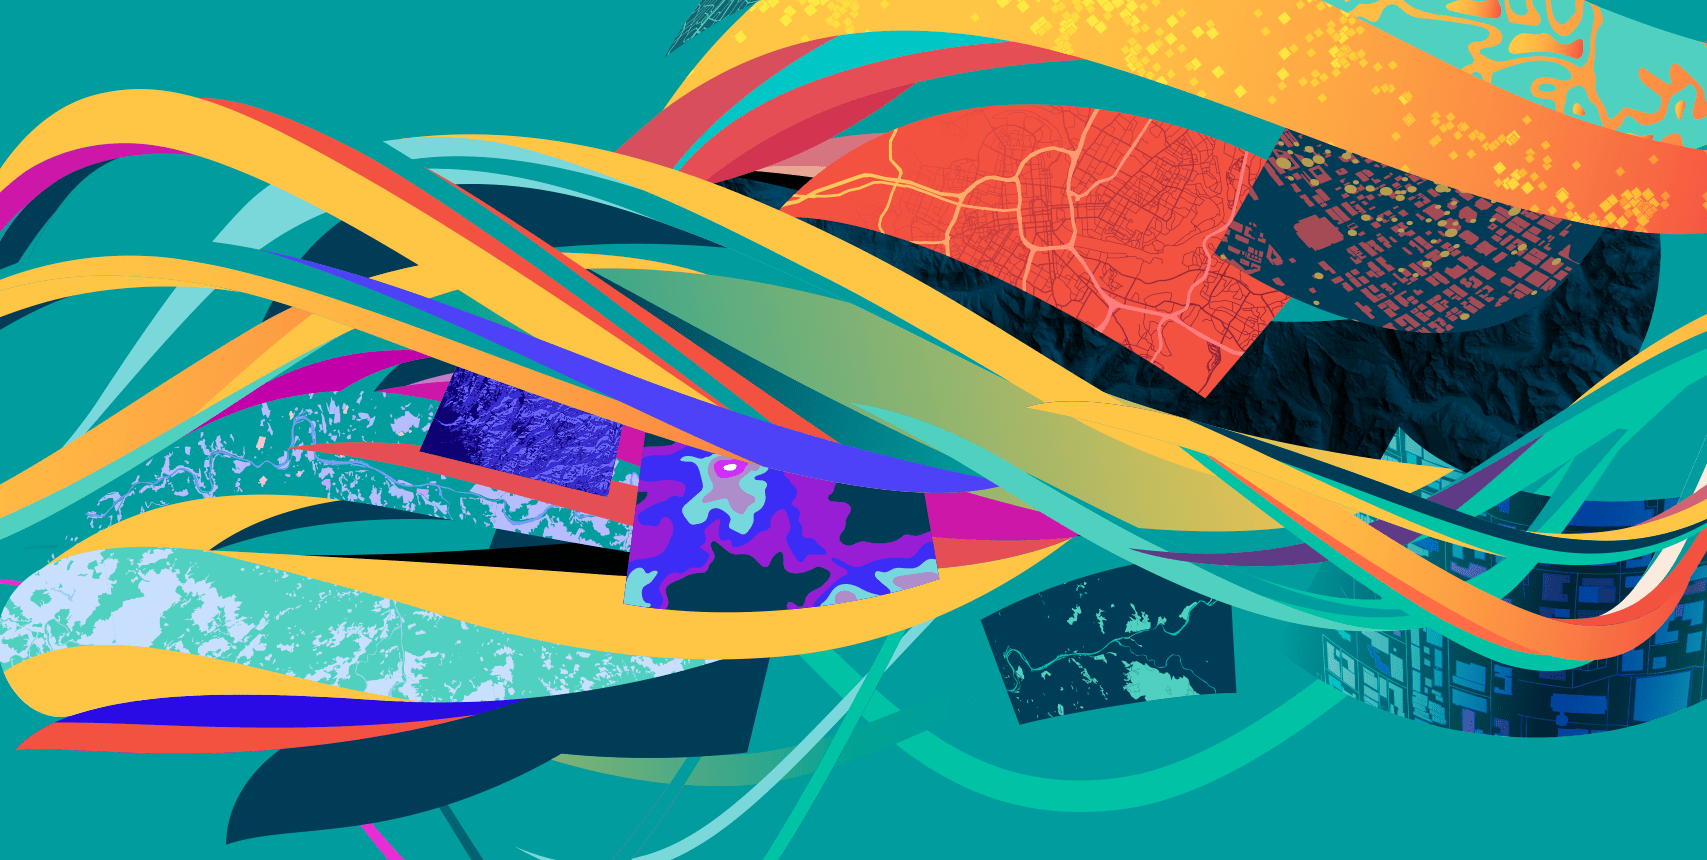 Bright waves of swirling colors with multiple map graphics intertwined, in teals, yellows, oranges, blues, reds, and purples